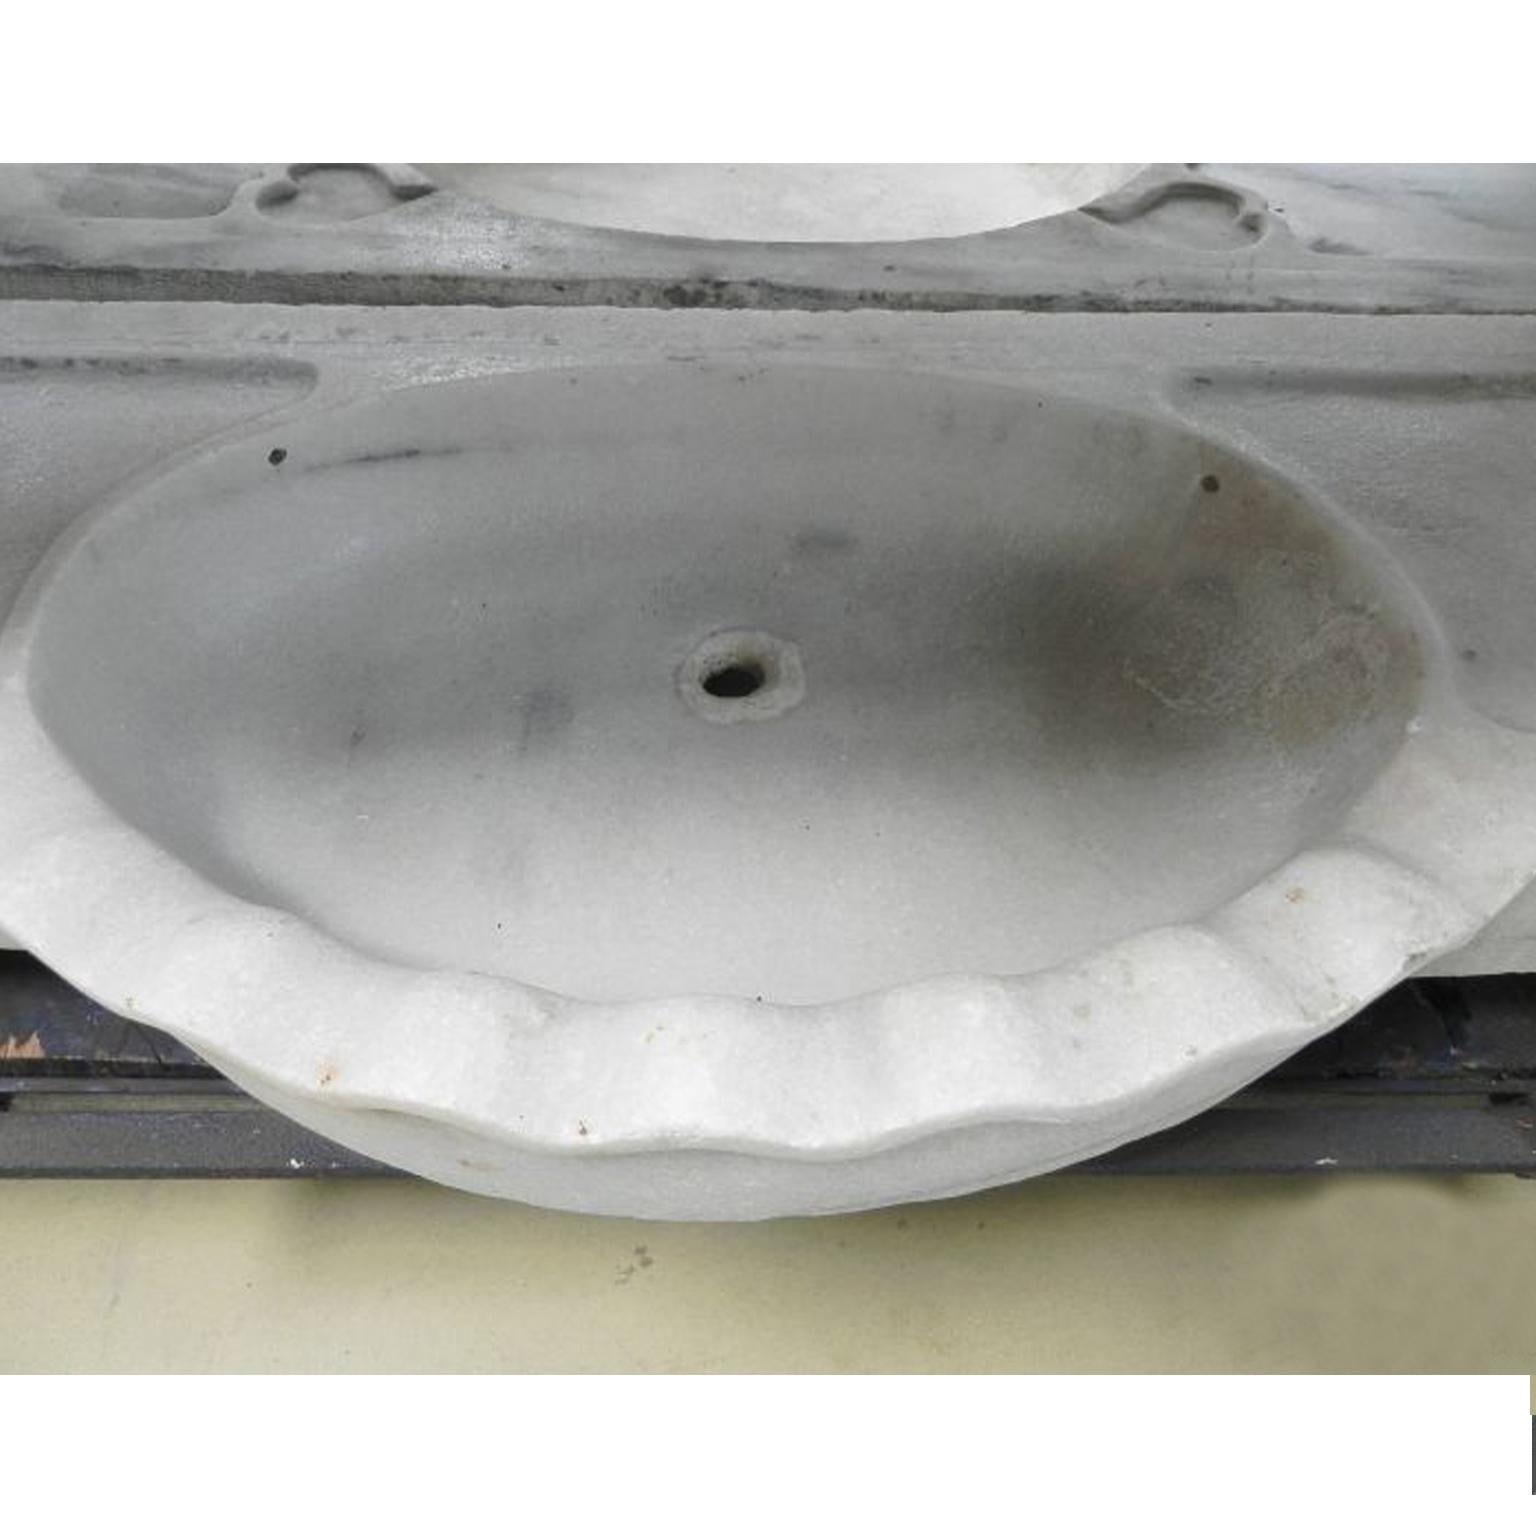 We are now manufacturing this model in Carrara Marble Bianco.
Deck extension available 
Custom sizing available

As tradition this timeless Italian classical sink is cut from one single block of white marble, the designs have not changed since Greek